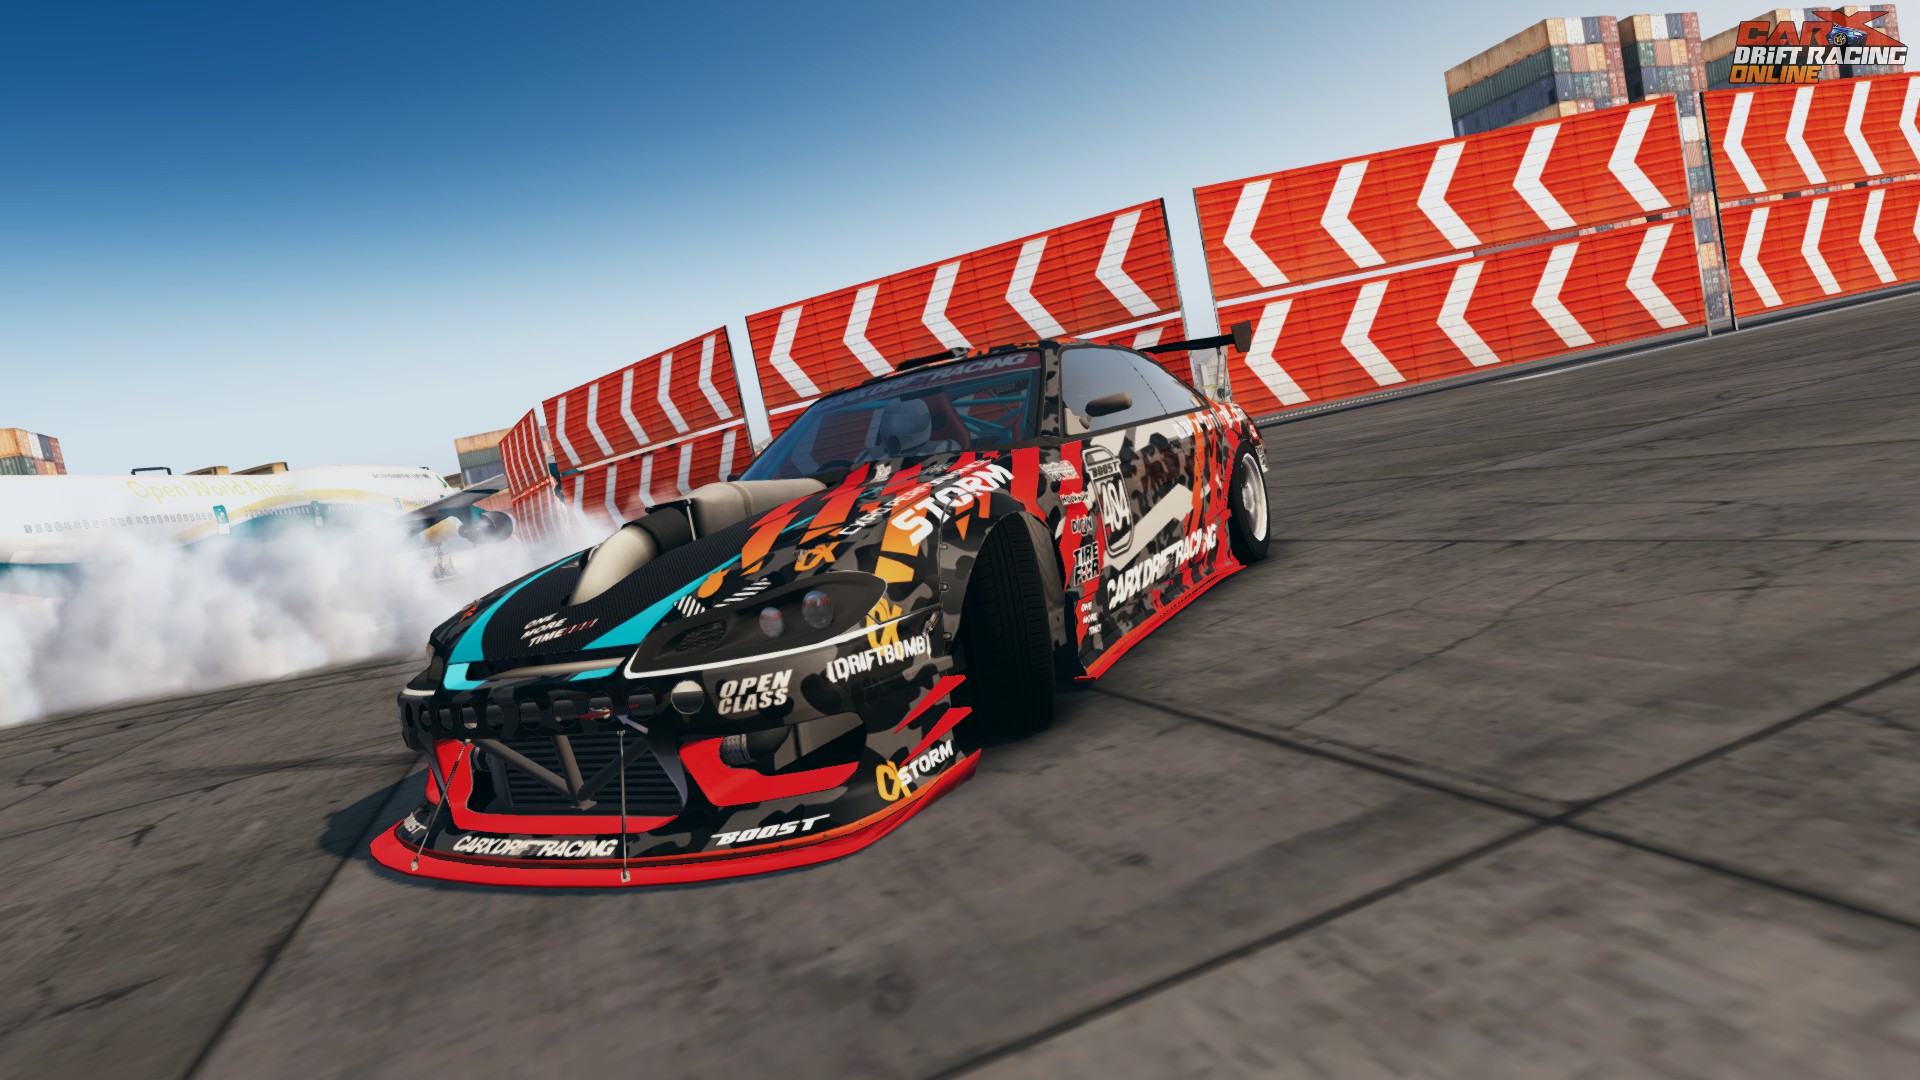 Racing Car Drift download the last version for windows